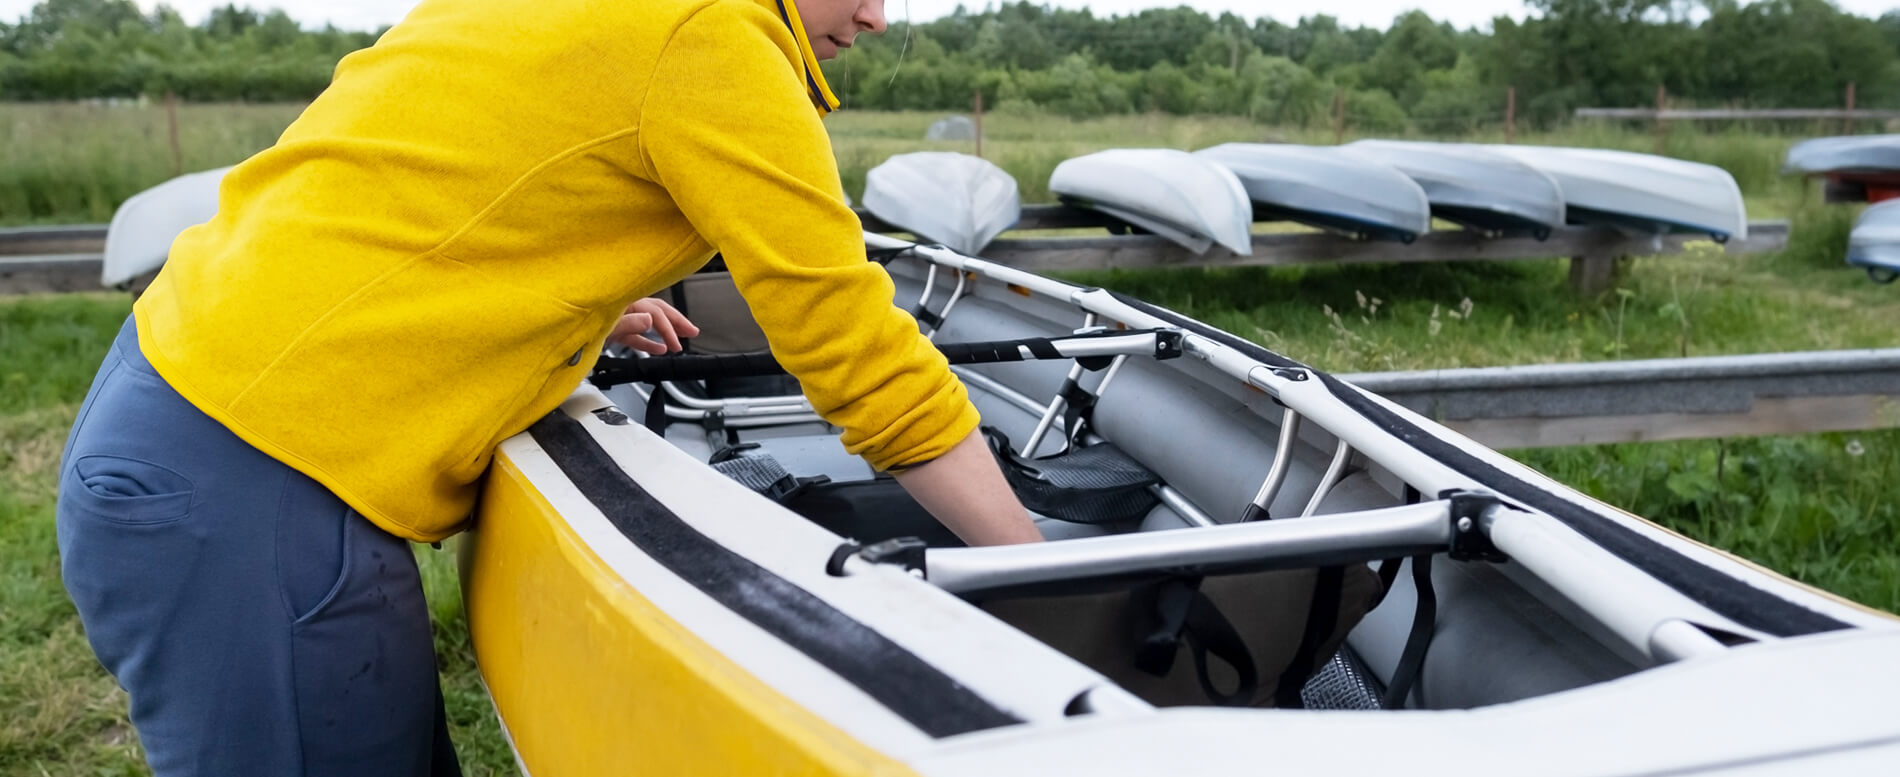 Woman cleaning the interior of her kayak